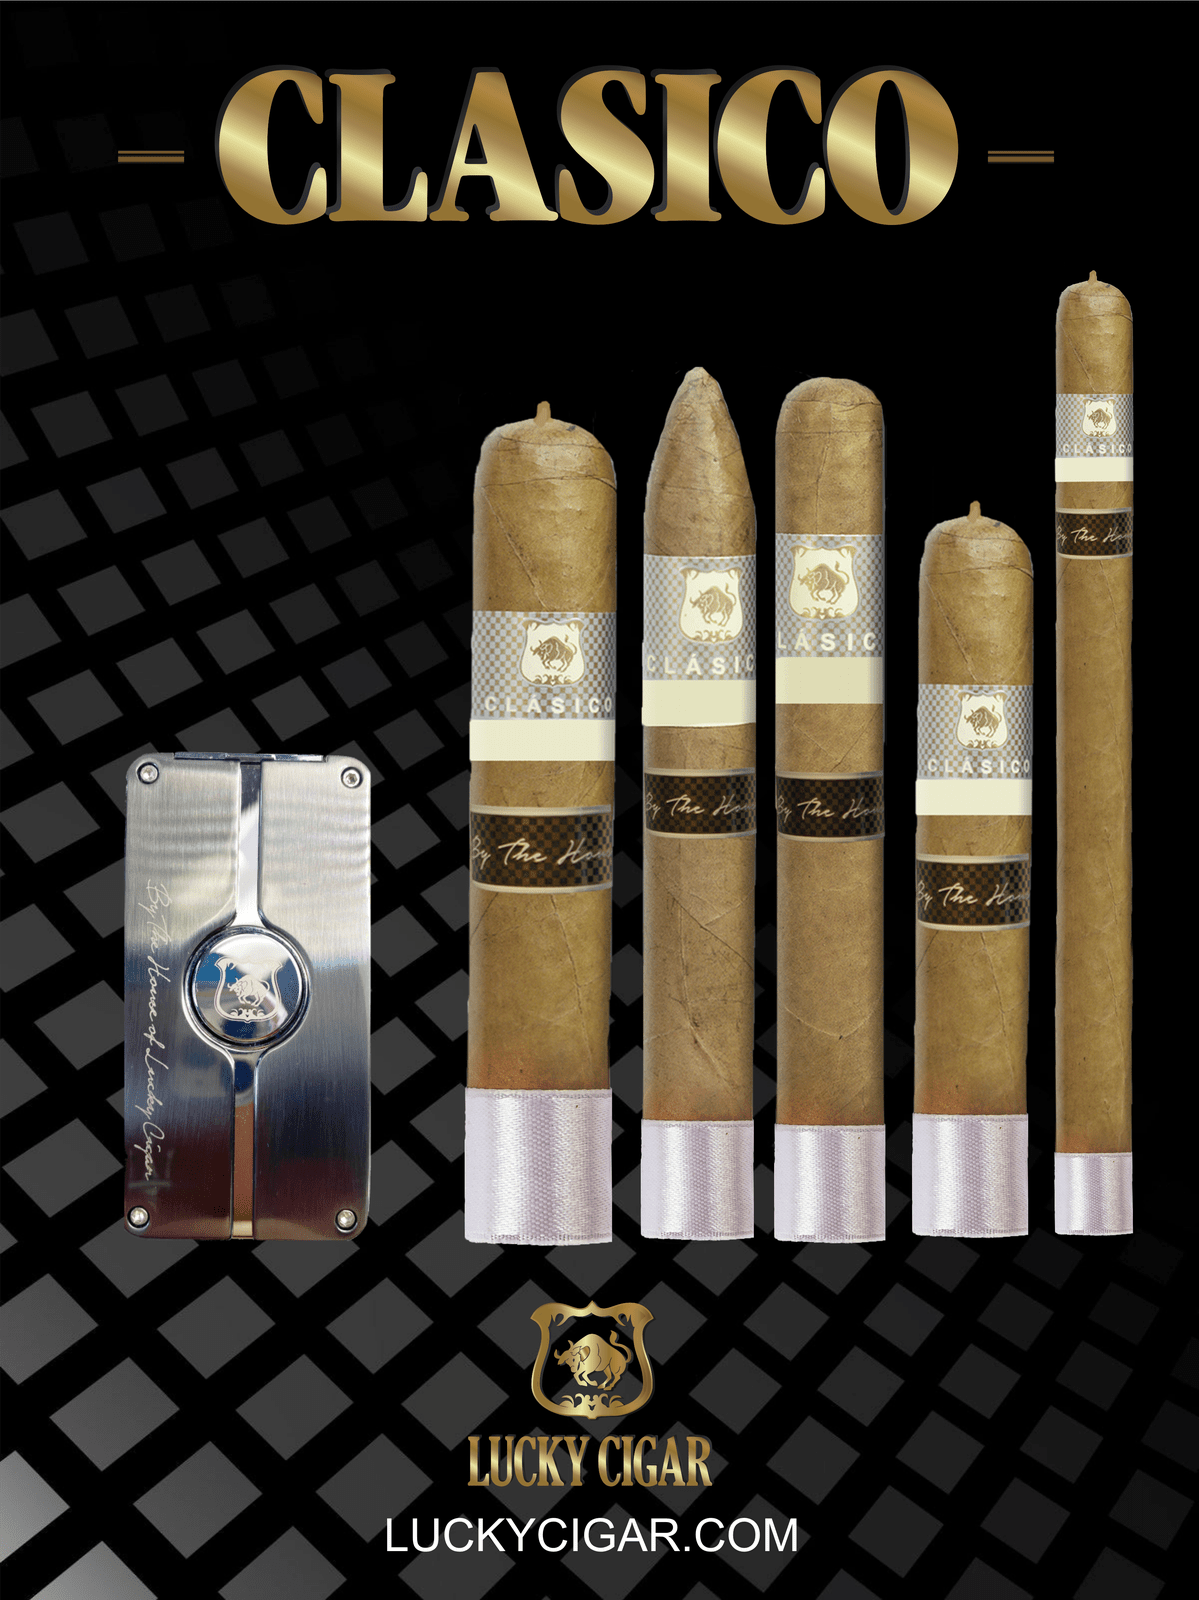 Classic Cigars - Classico by Lucky Cigar: Set of 5 Cigars Robusto, Lancero, Toro, Torpedo, Gordo with Torch Lighter